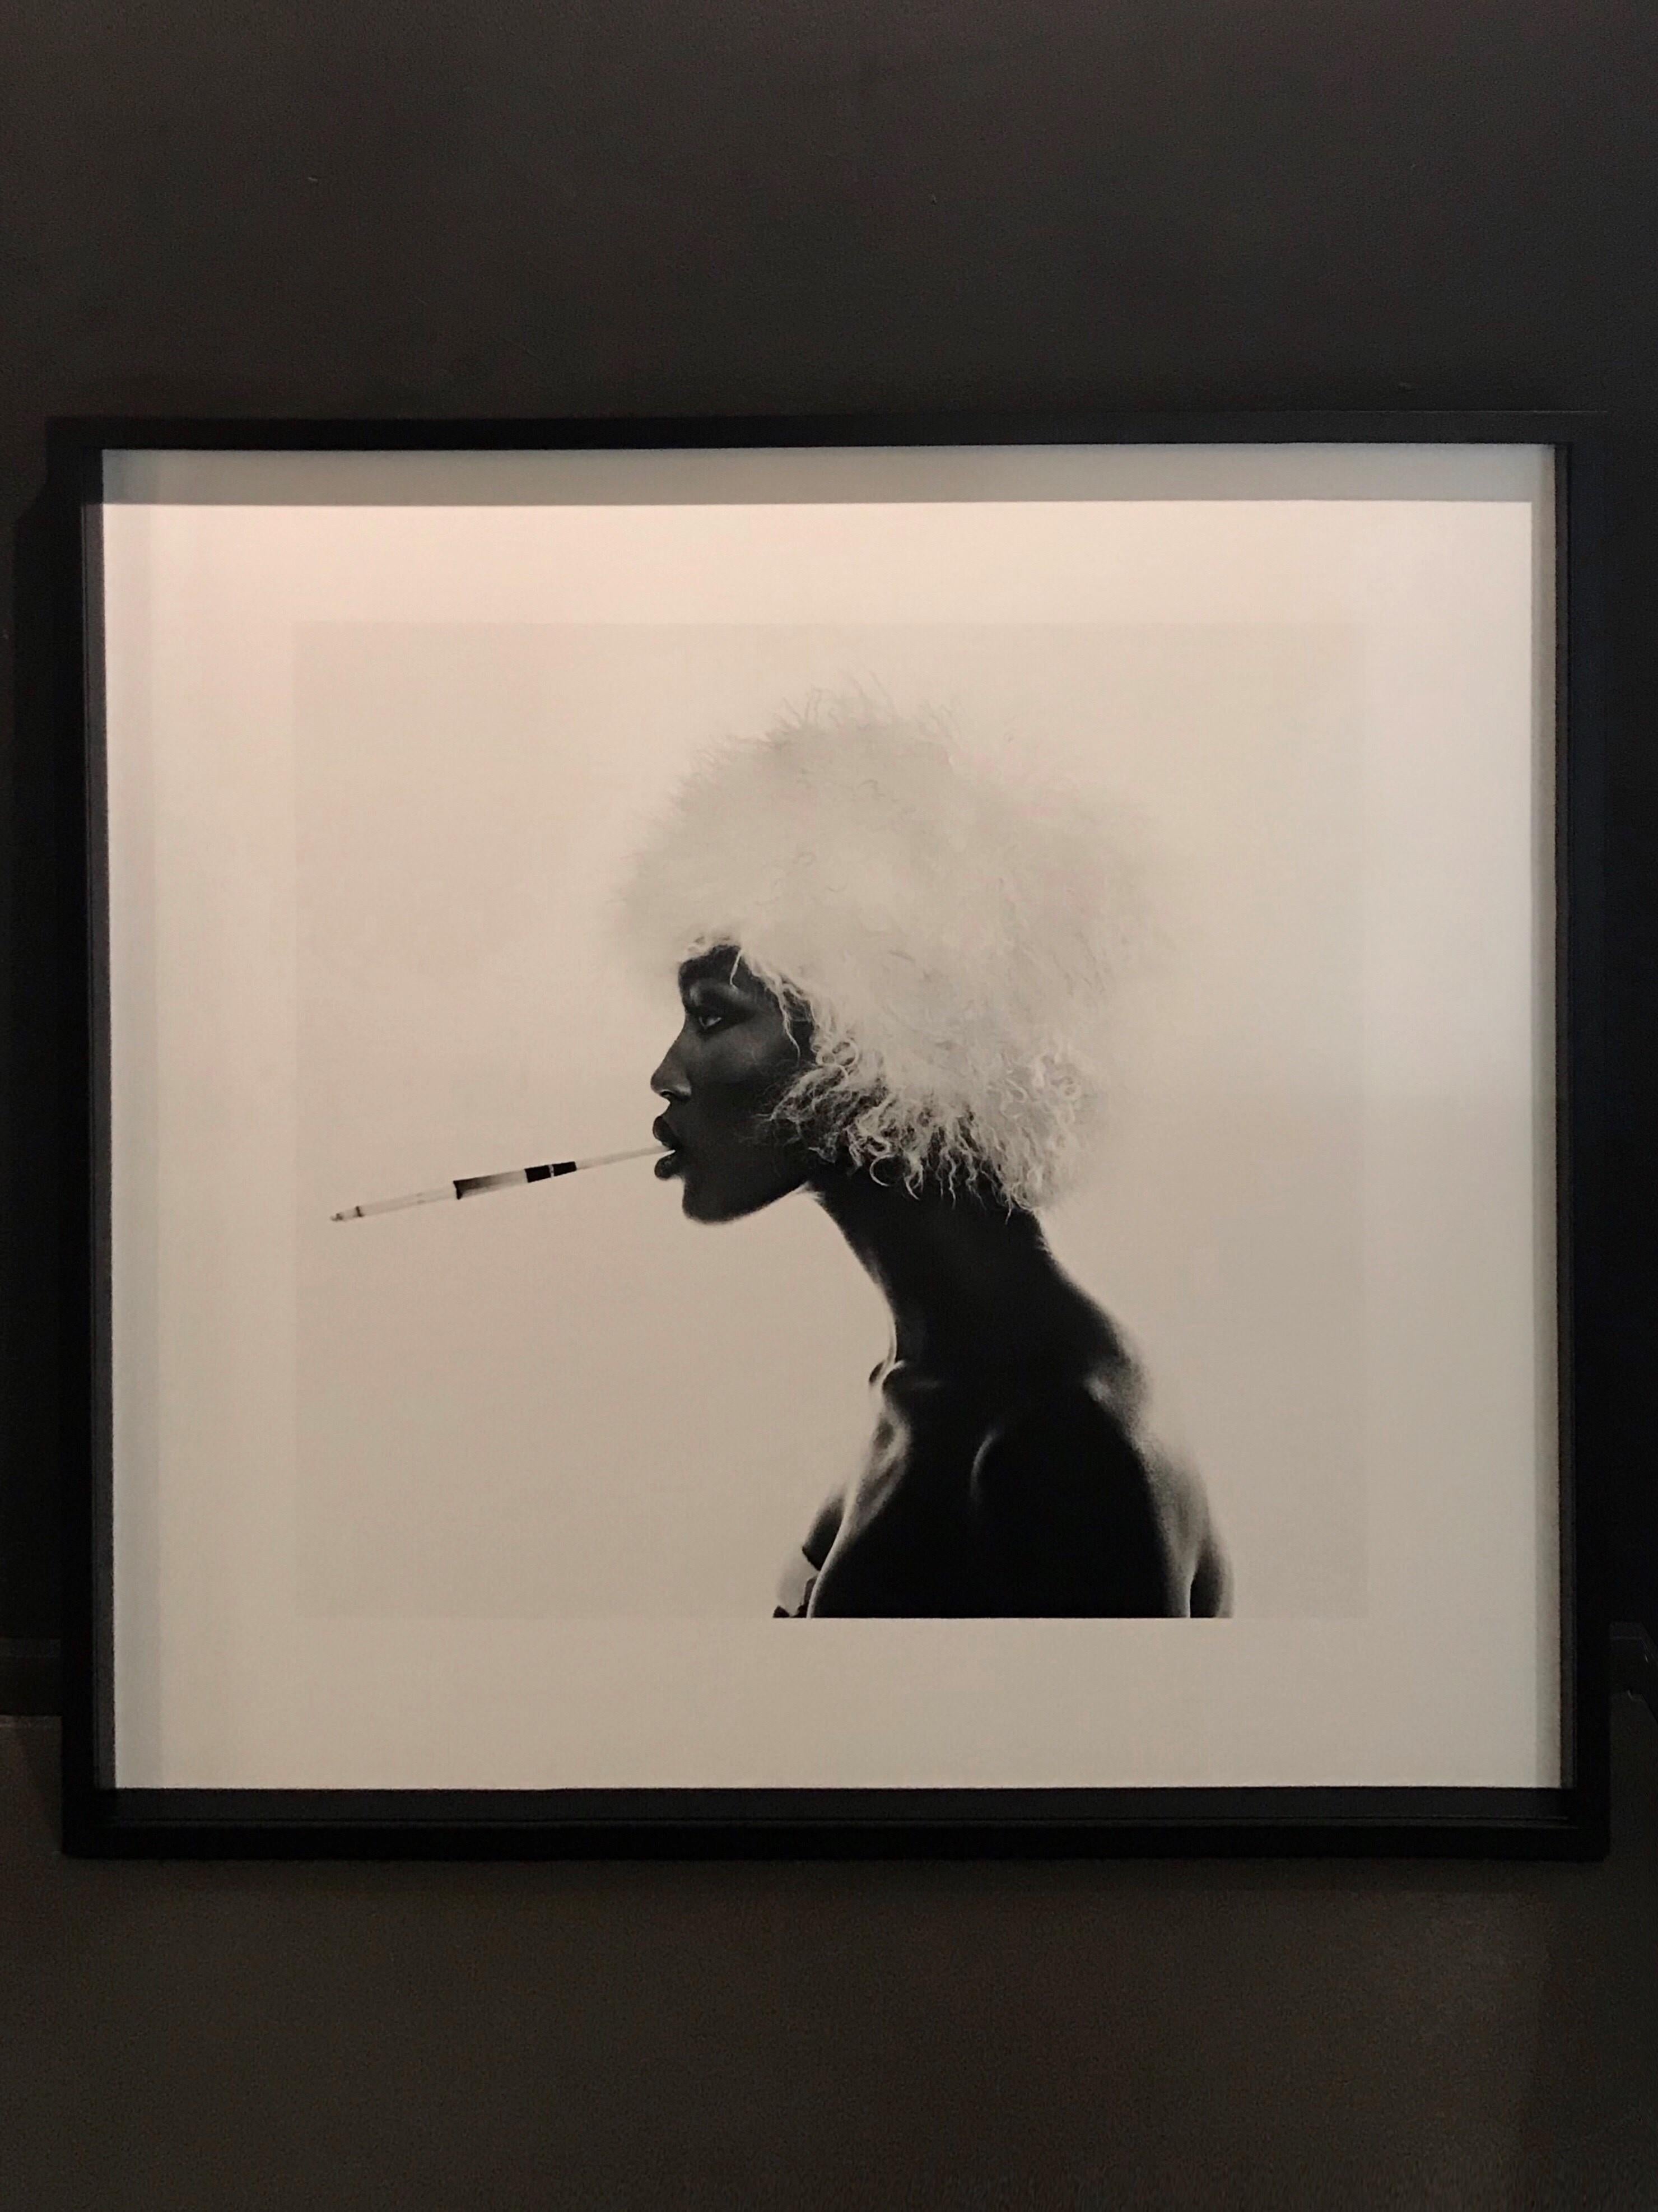 Naomi Campbell - b&w portrait of the supermodel - Photograph by Michel Comte